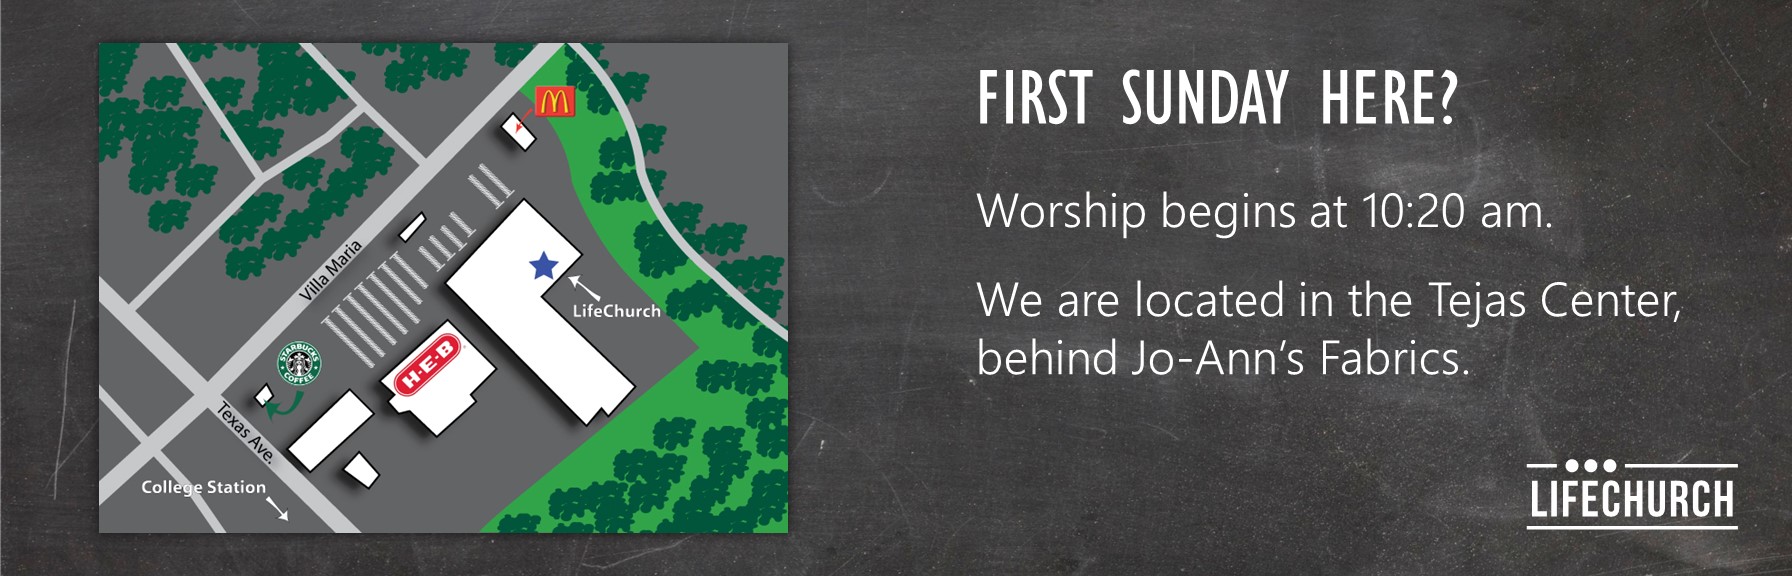 First Sunday here? Worship begins at 10:20am. We are located in the Tejas Center, behind Jo-ann's Fabrics.